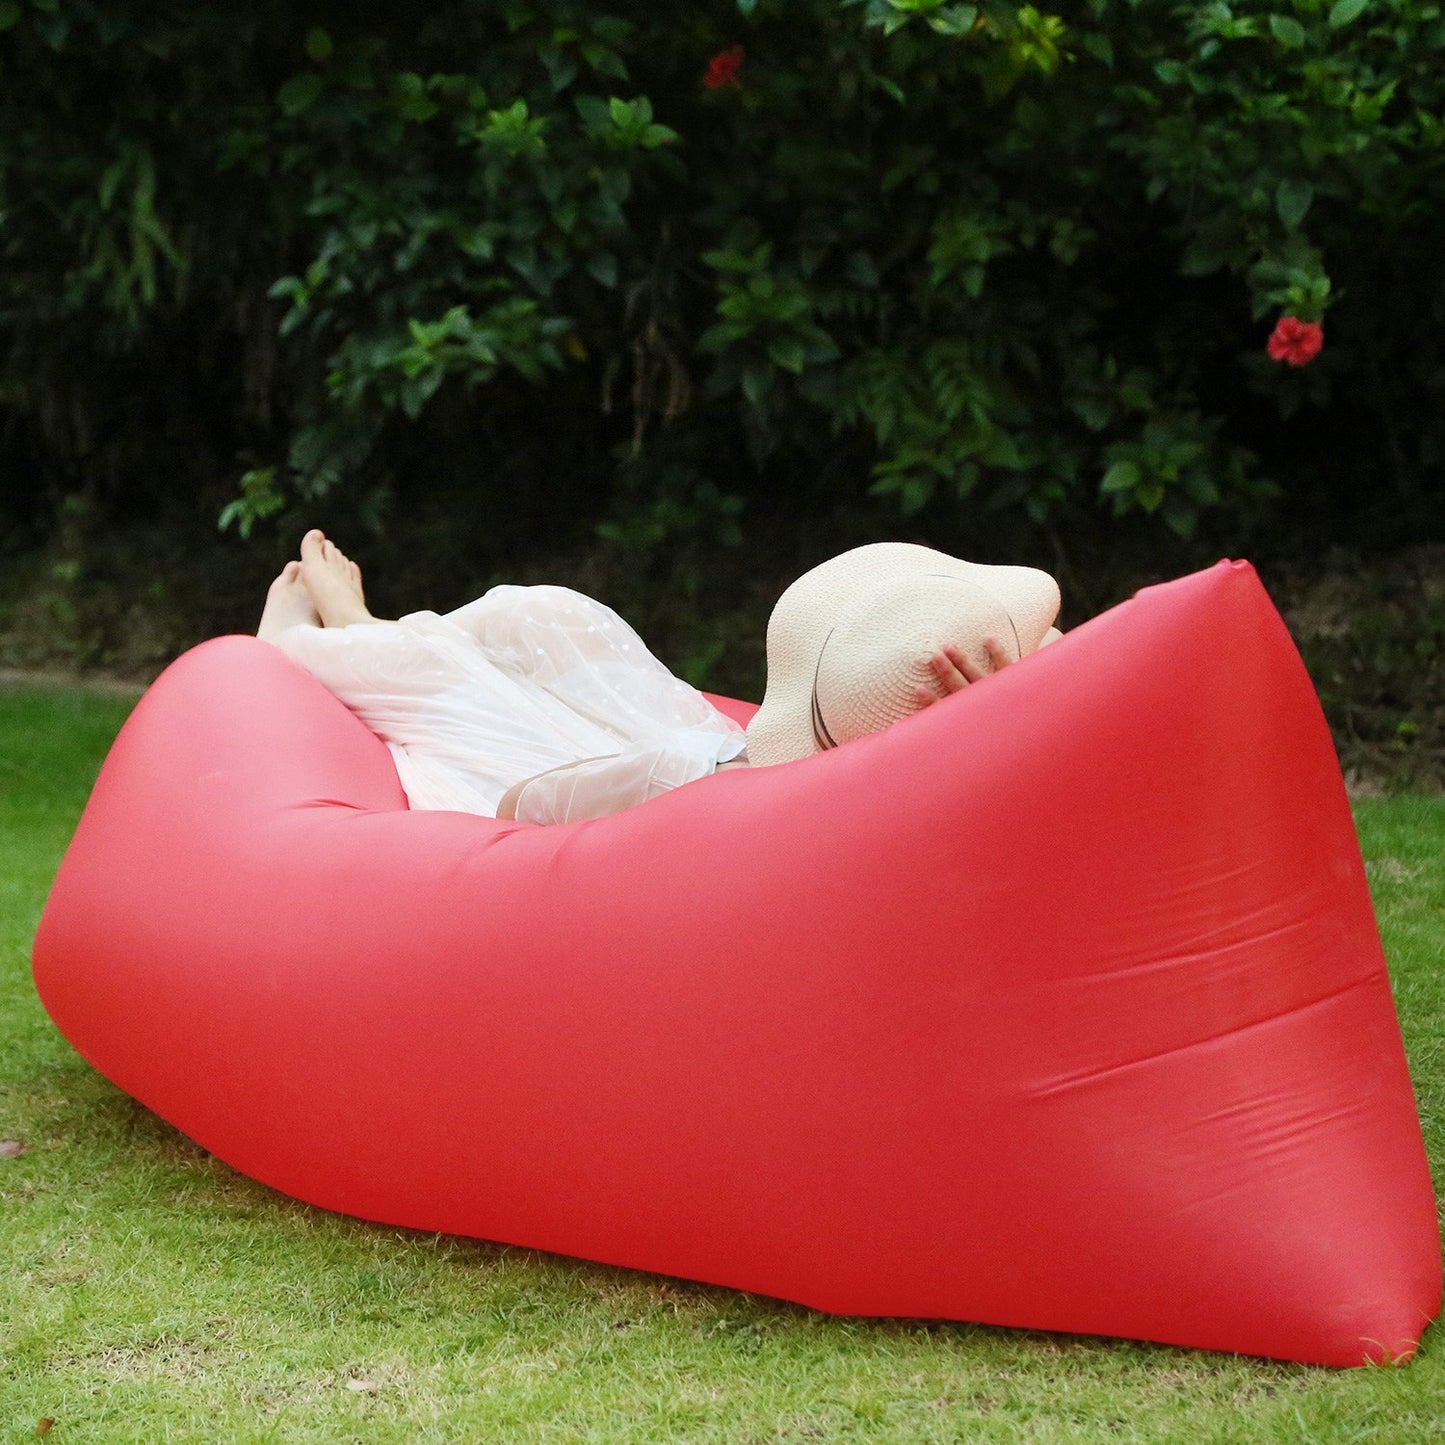 Portable Inflatable Lounger Air Sofa Lazy Bed Sofa